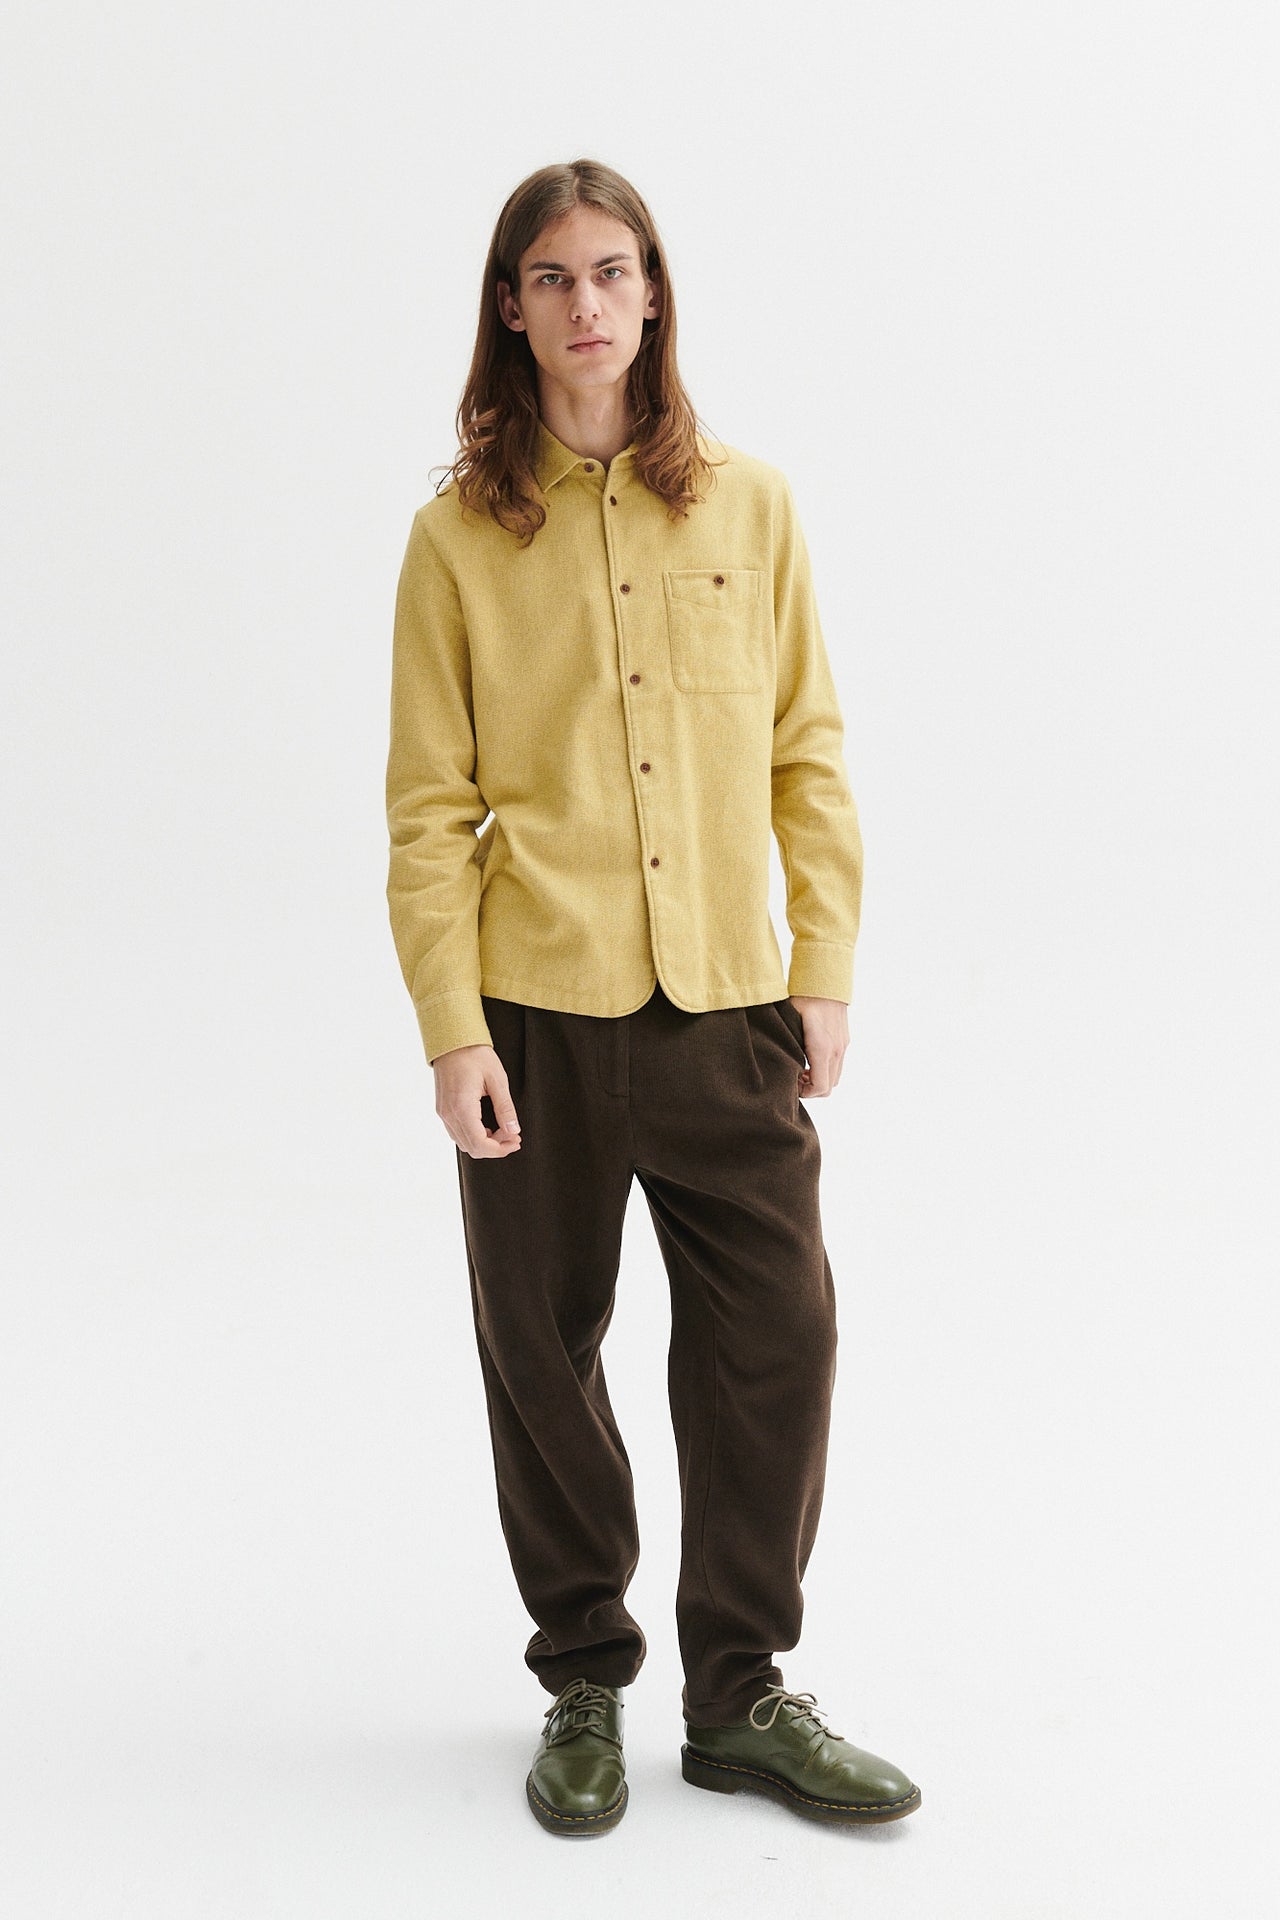 Strong Shirt in the Finest Portuguese Flannel in Mélange Yellow and Beige with corozzo buttons